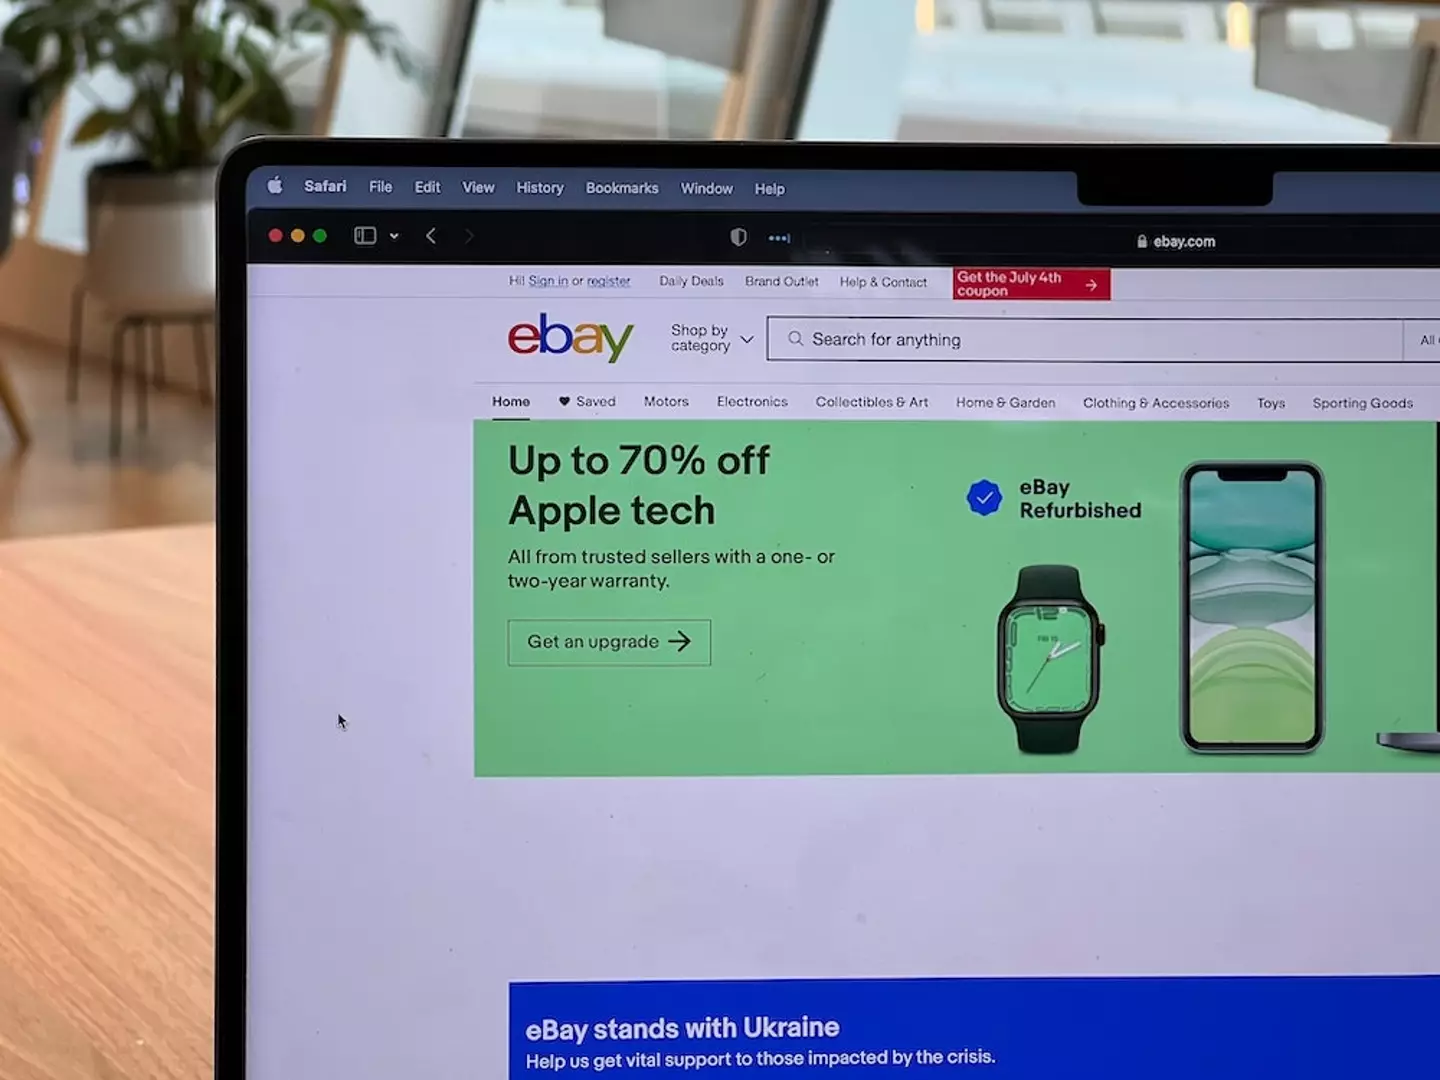 Can you believe 27 years have passed since the first eBay sale?